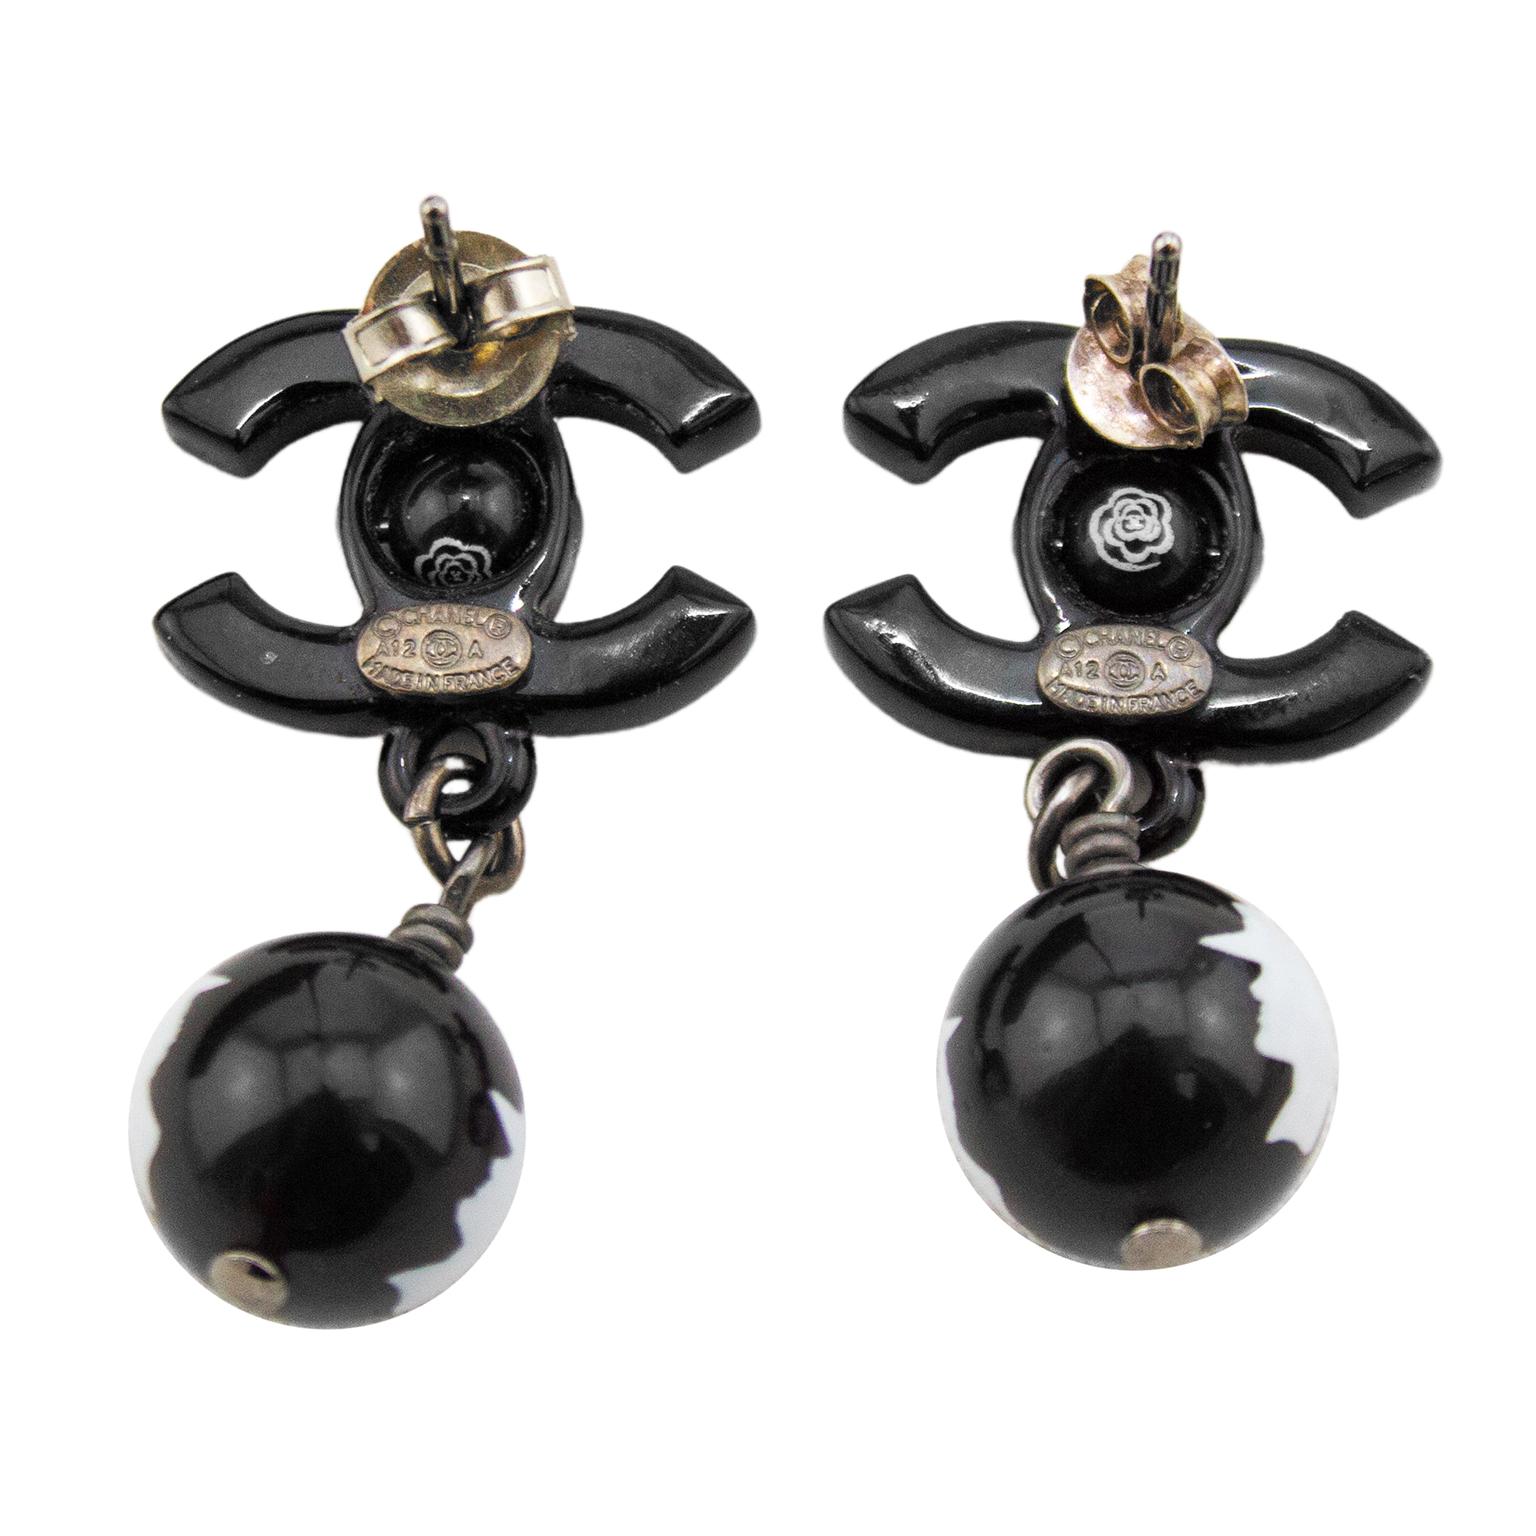 Chanel earrings from the Autumn 2012 collection. Black resin interlocking CC's with a tiny rotating ball in the centre with a white camellia flower on one side and a Coco Chanel cameo on the other and a drop ball with white Coco Chanel cameos on